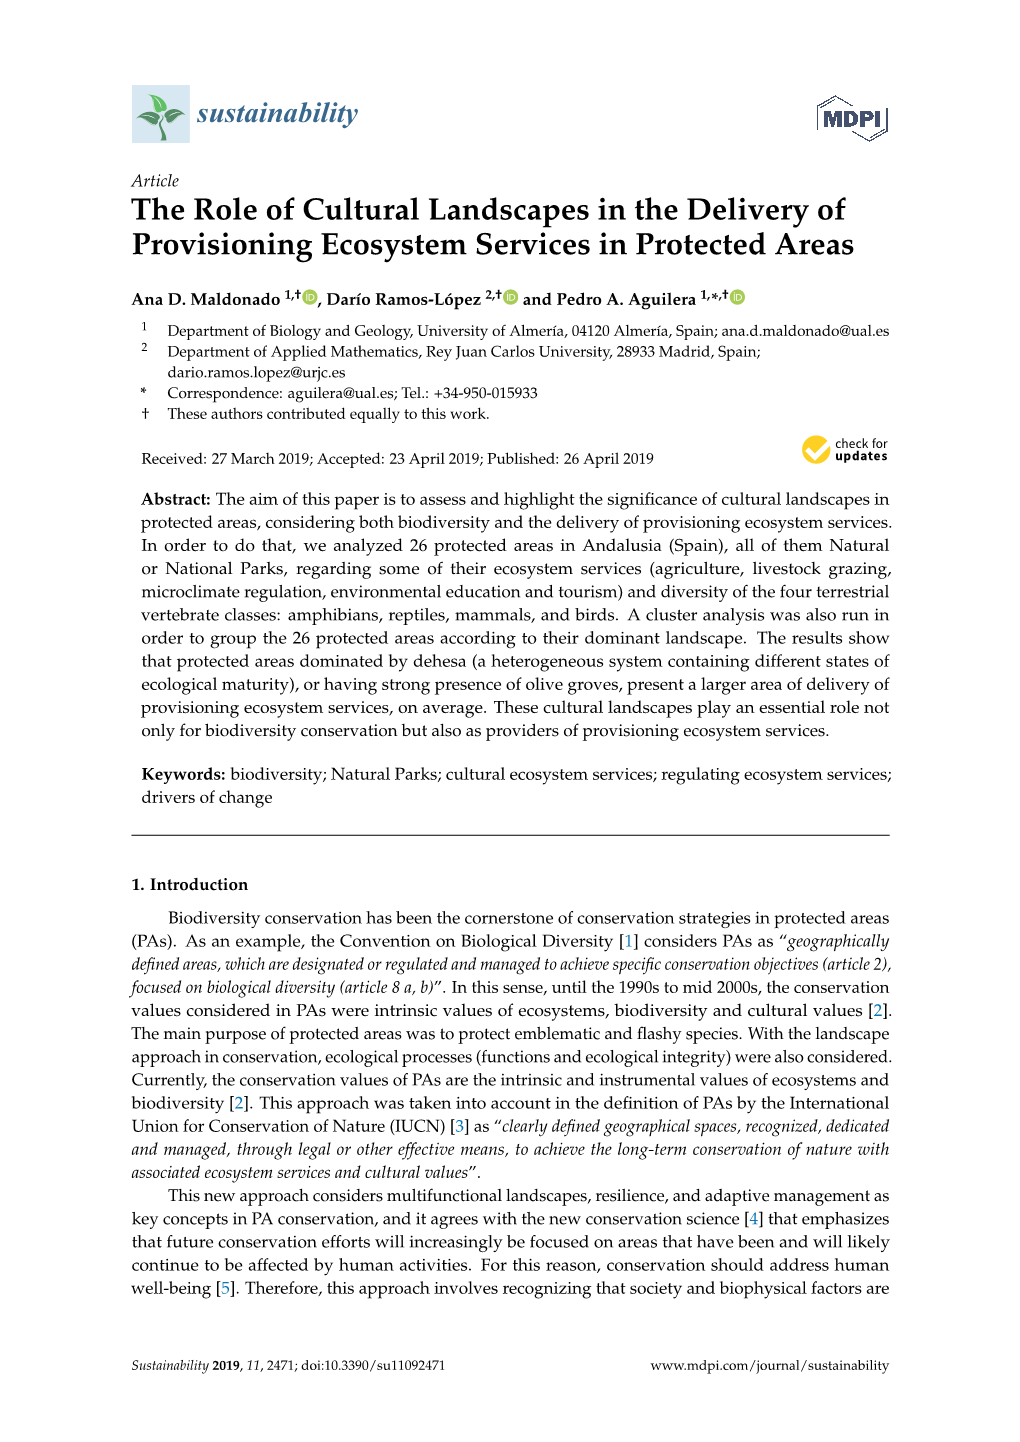 The Role of Cultural Landscapes in the Delivery of Provisioning Ecosystem Services in Protected Areas